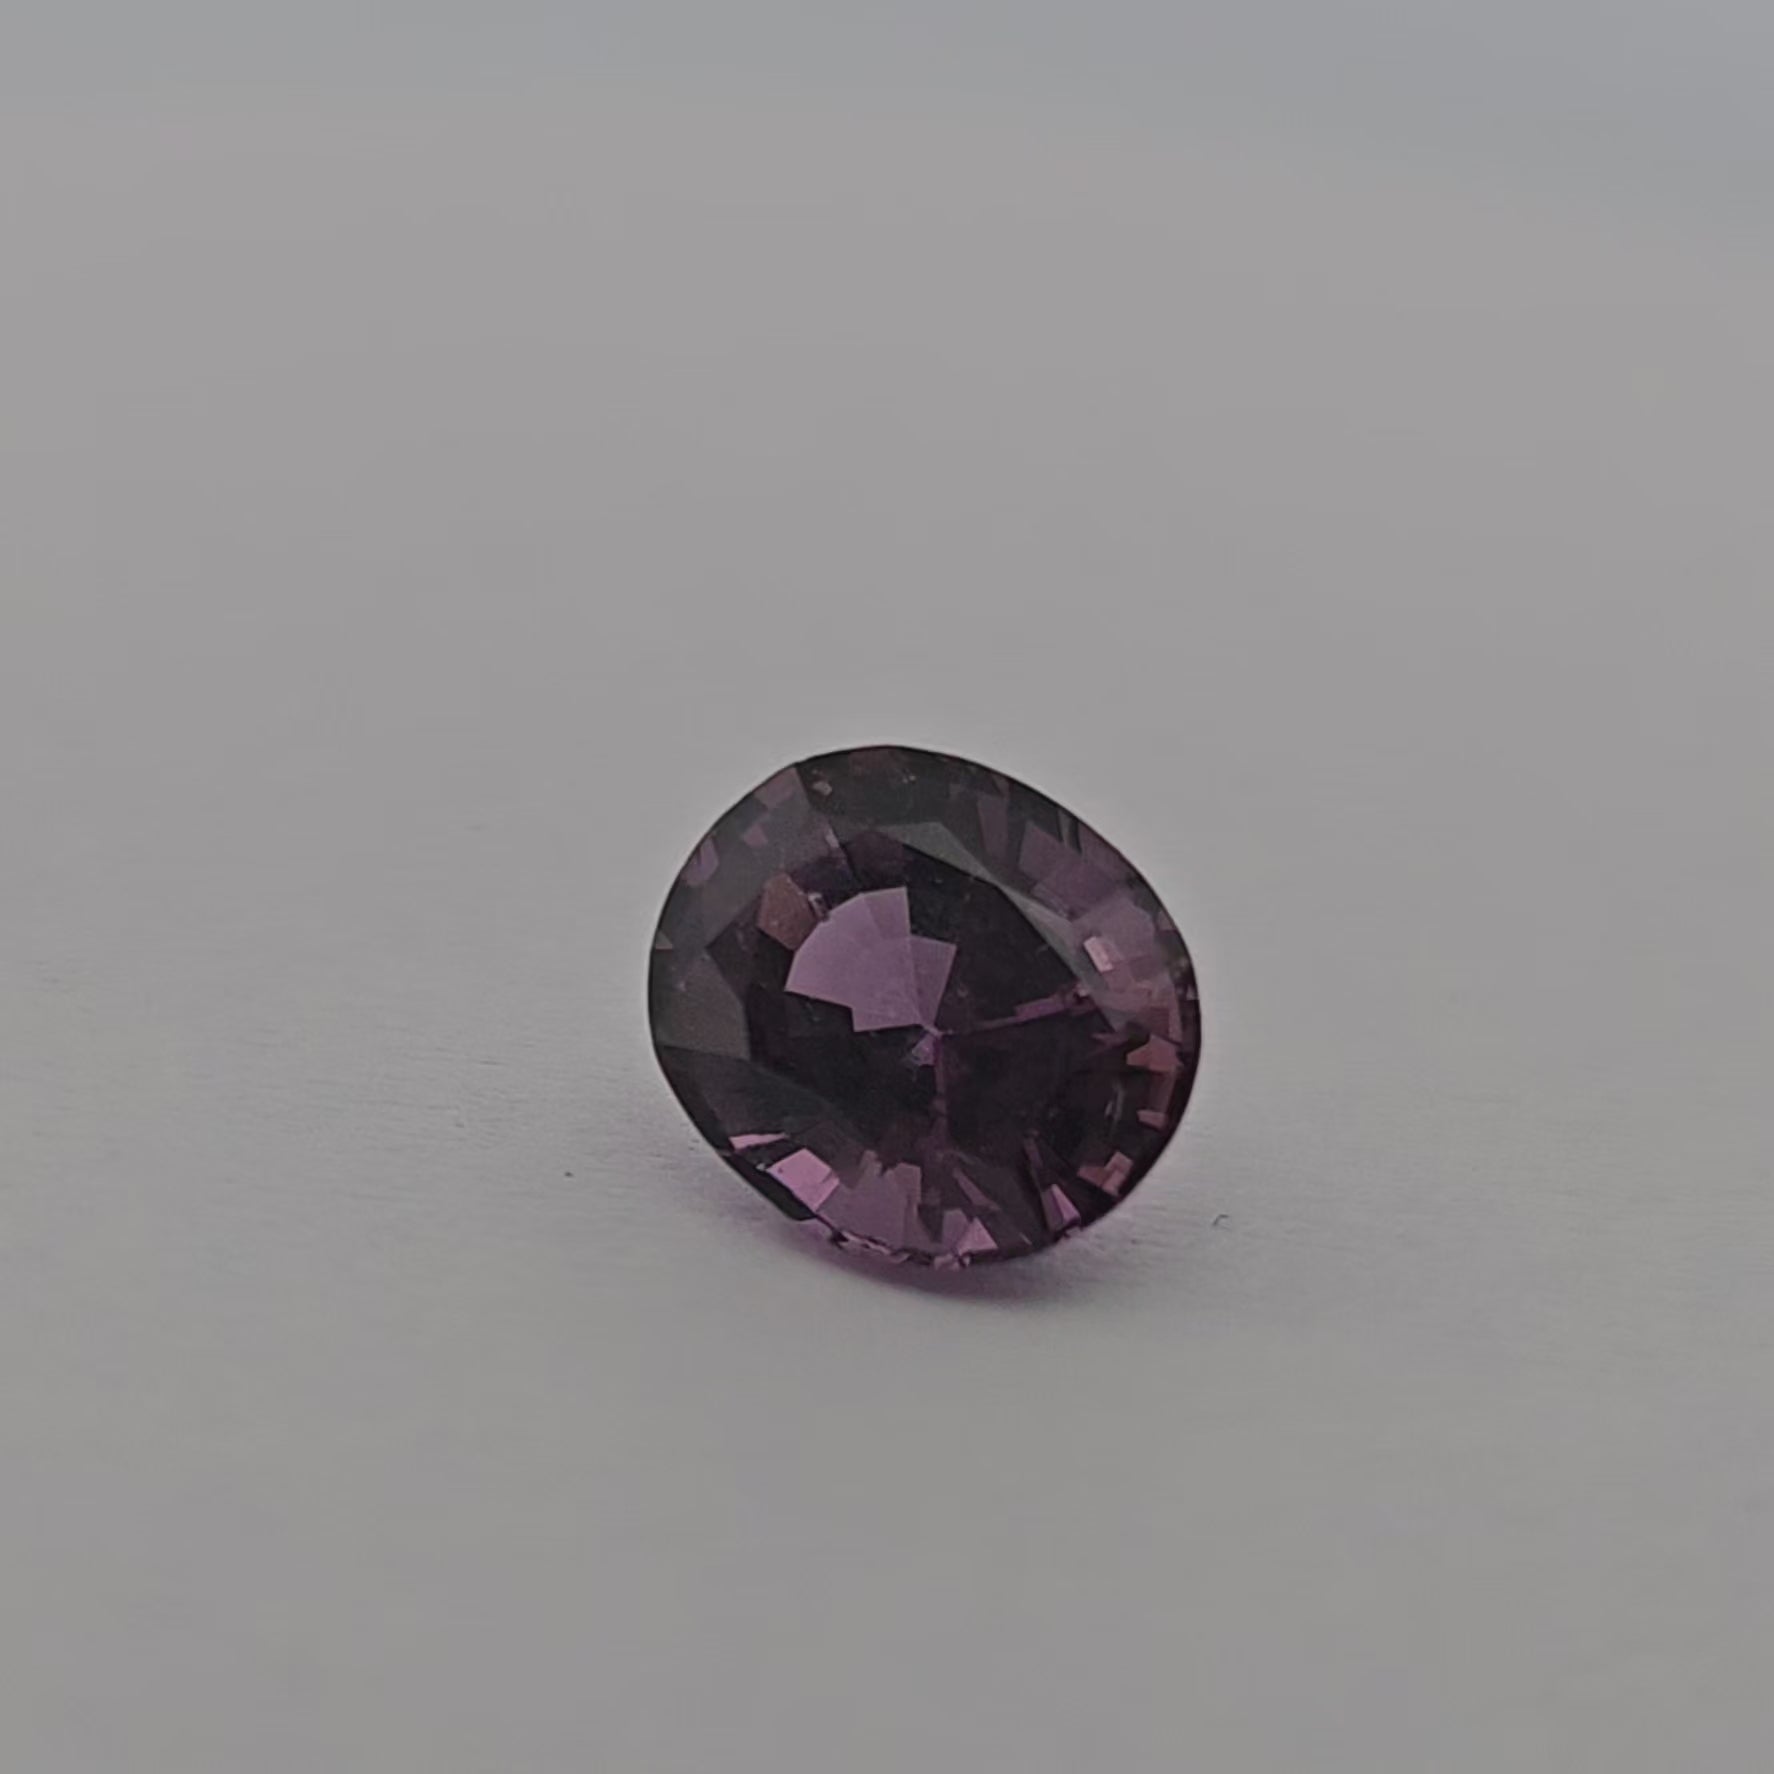 loose Natural Multi Spinel Stone 2.56 Carats Oval Cut (8.8x7.5 mm)